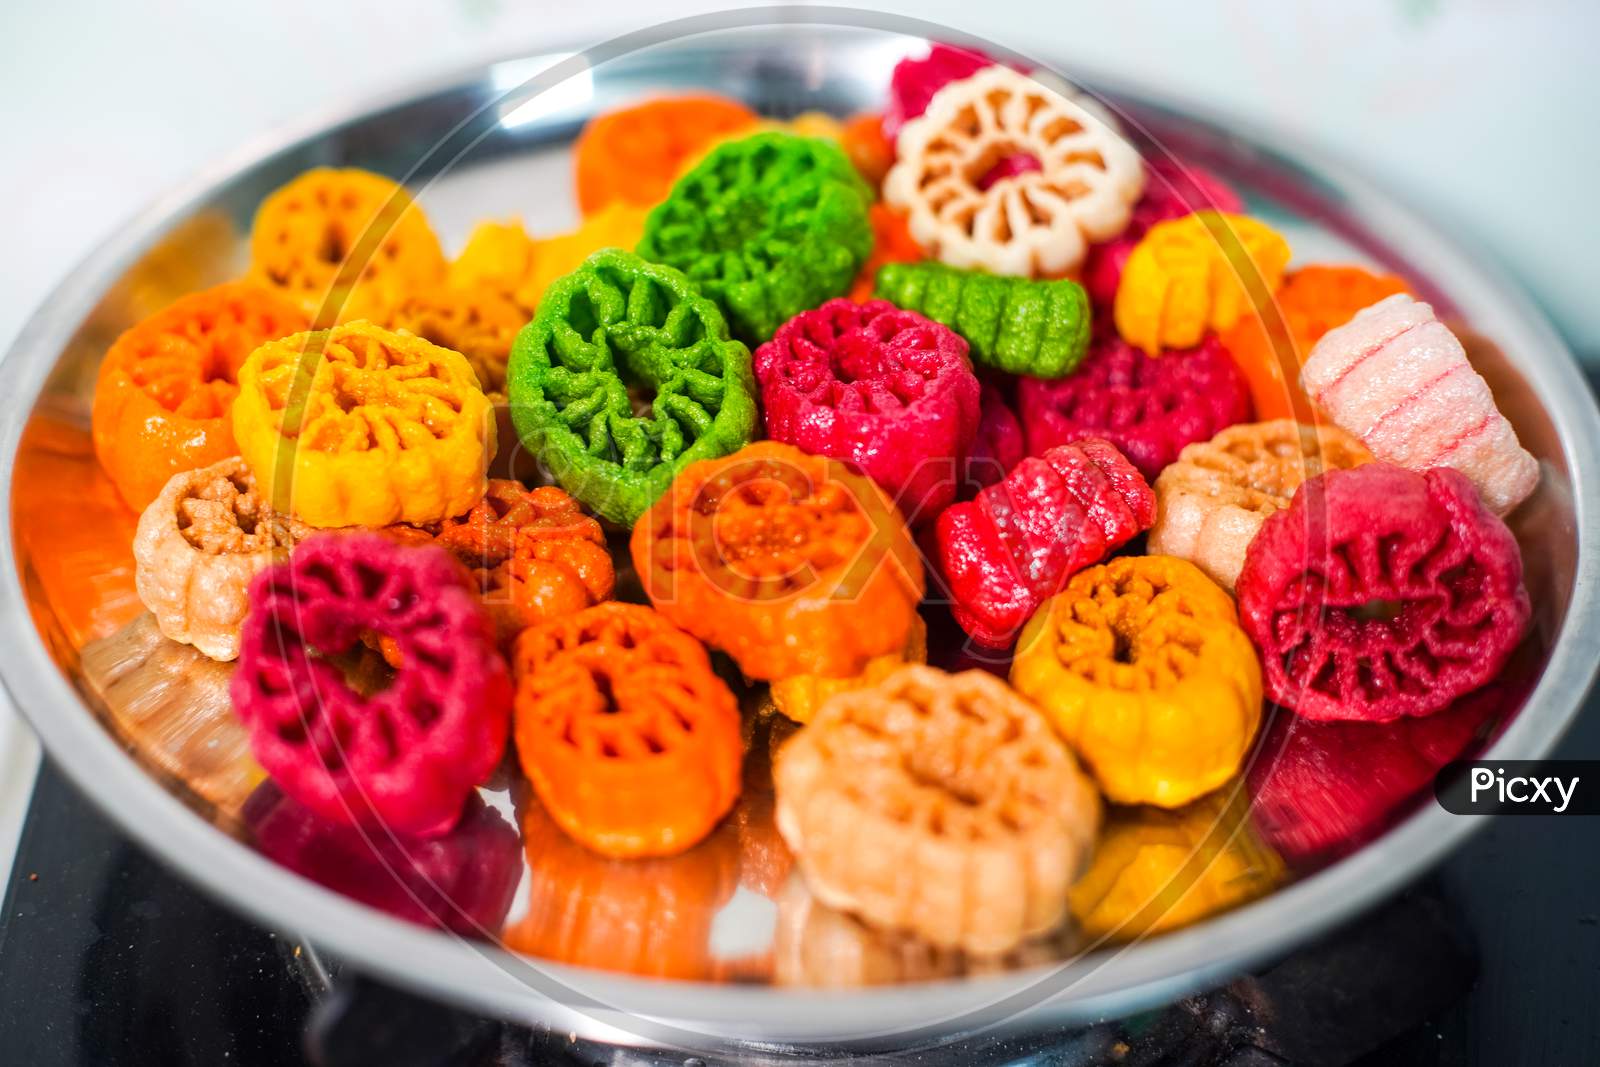 Shot Of Colorful Fryums Being Deep Fried In Hot Oil Bubbling And Sizzling With Bubbles Forming And Size Increasing Of This Popular North Indian Snack And Street Food